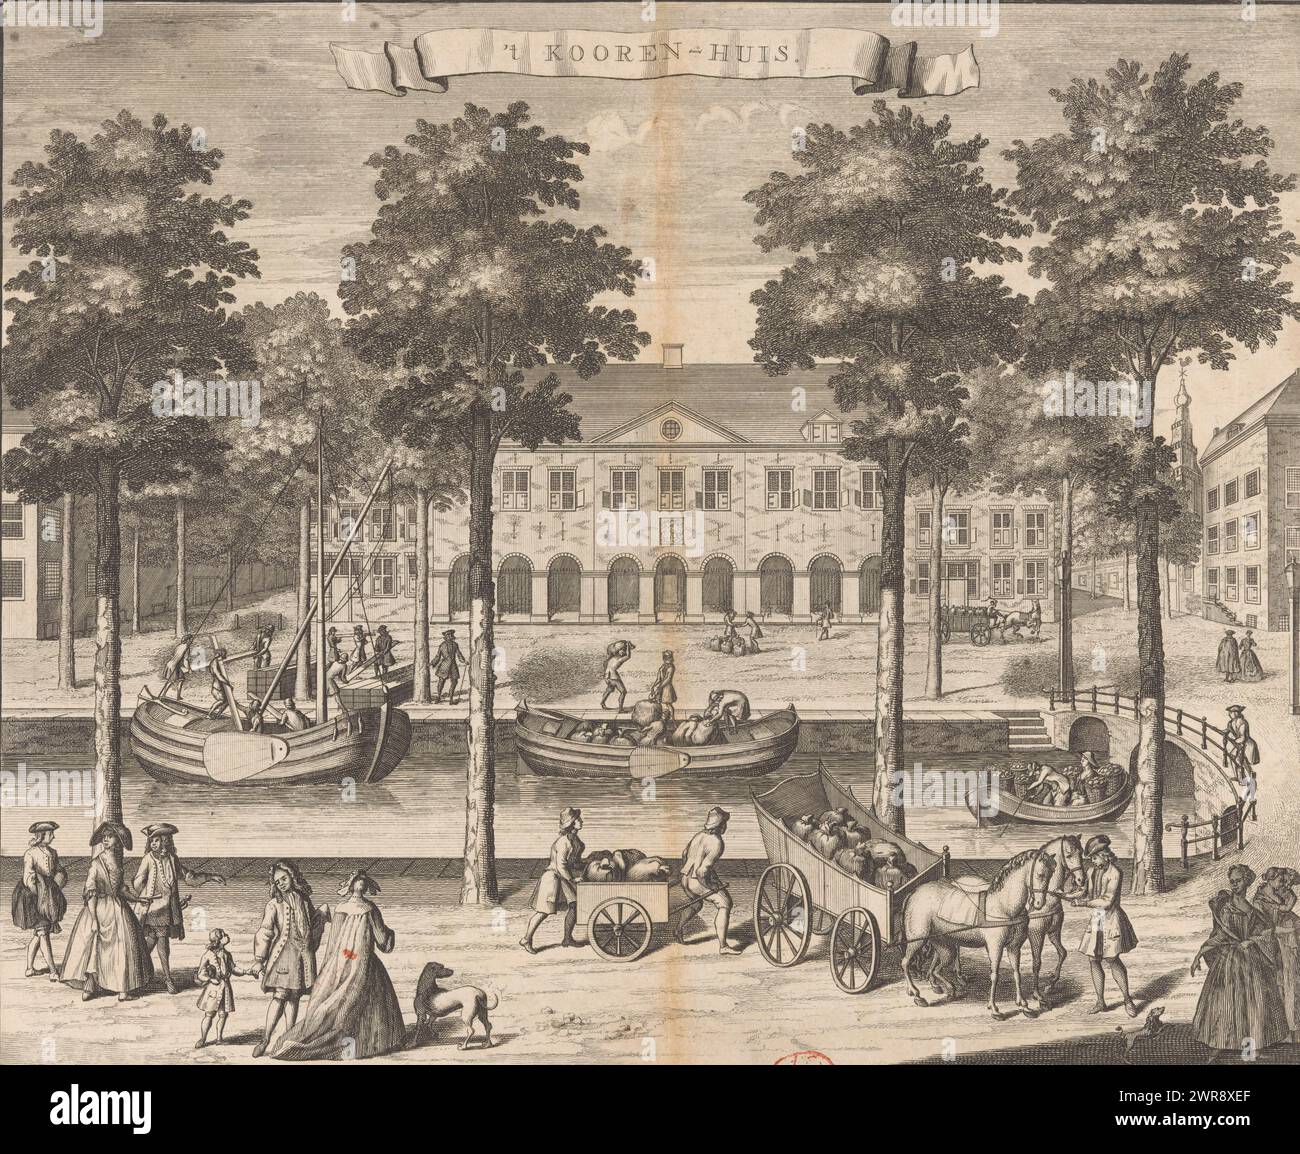 View of the Koorenhuis in The Hague, 't Kooren-Huis (title on object), View of the Koorenhuis on the Prinsegracht in The Hague. Two boats in the canal, different figures on the street., print maker: anonymous, after drawing by: Gerrit van Giessen, publisher: Reinier Boitet, after drawing by: The Hague, publisher: Delft, publisher: Amsterdam, 1730 - 1736, paper, etching, engraving, height 286 mm × width 343 mm, print Stock Photo